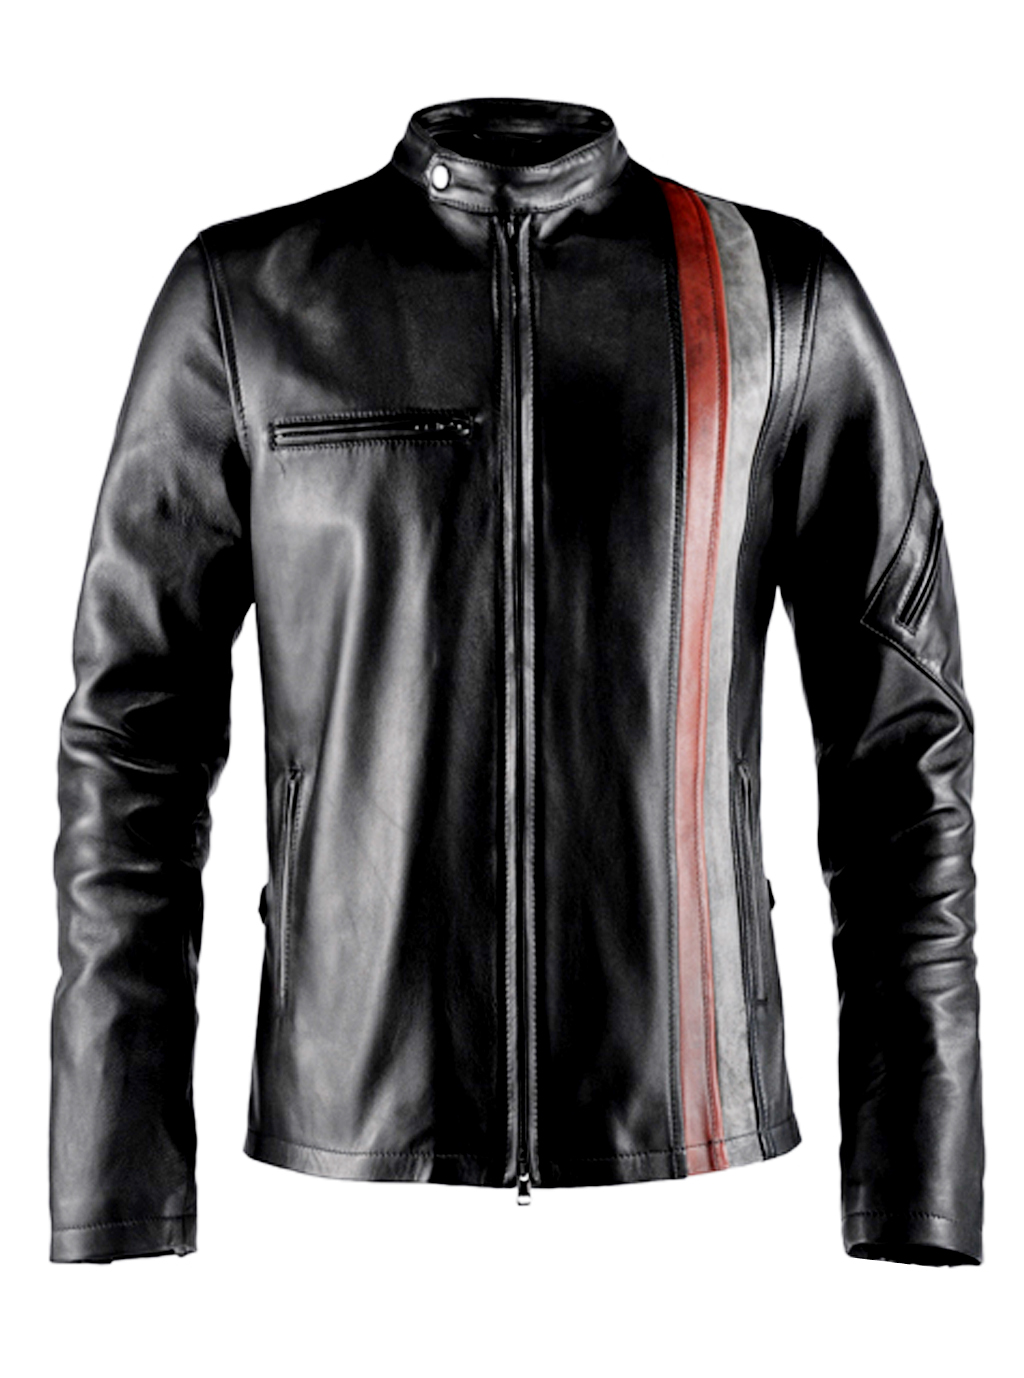 Cyclops-X-Men Super hero Hollywood Black Faux Leather Jacket | VearFit